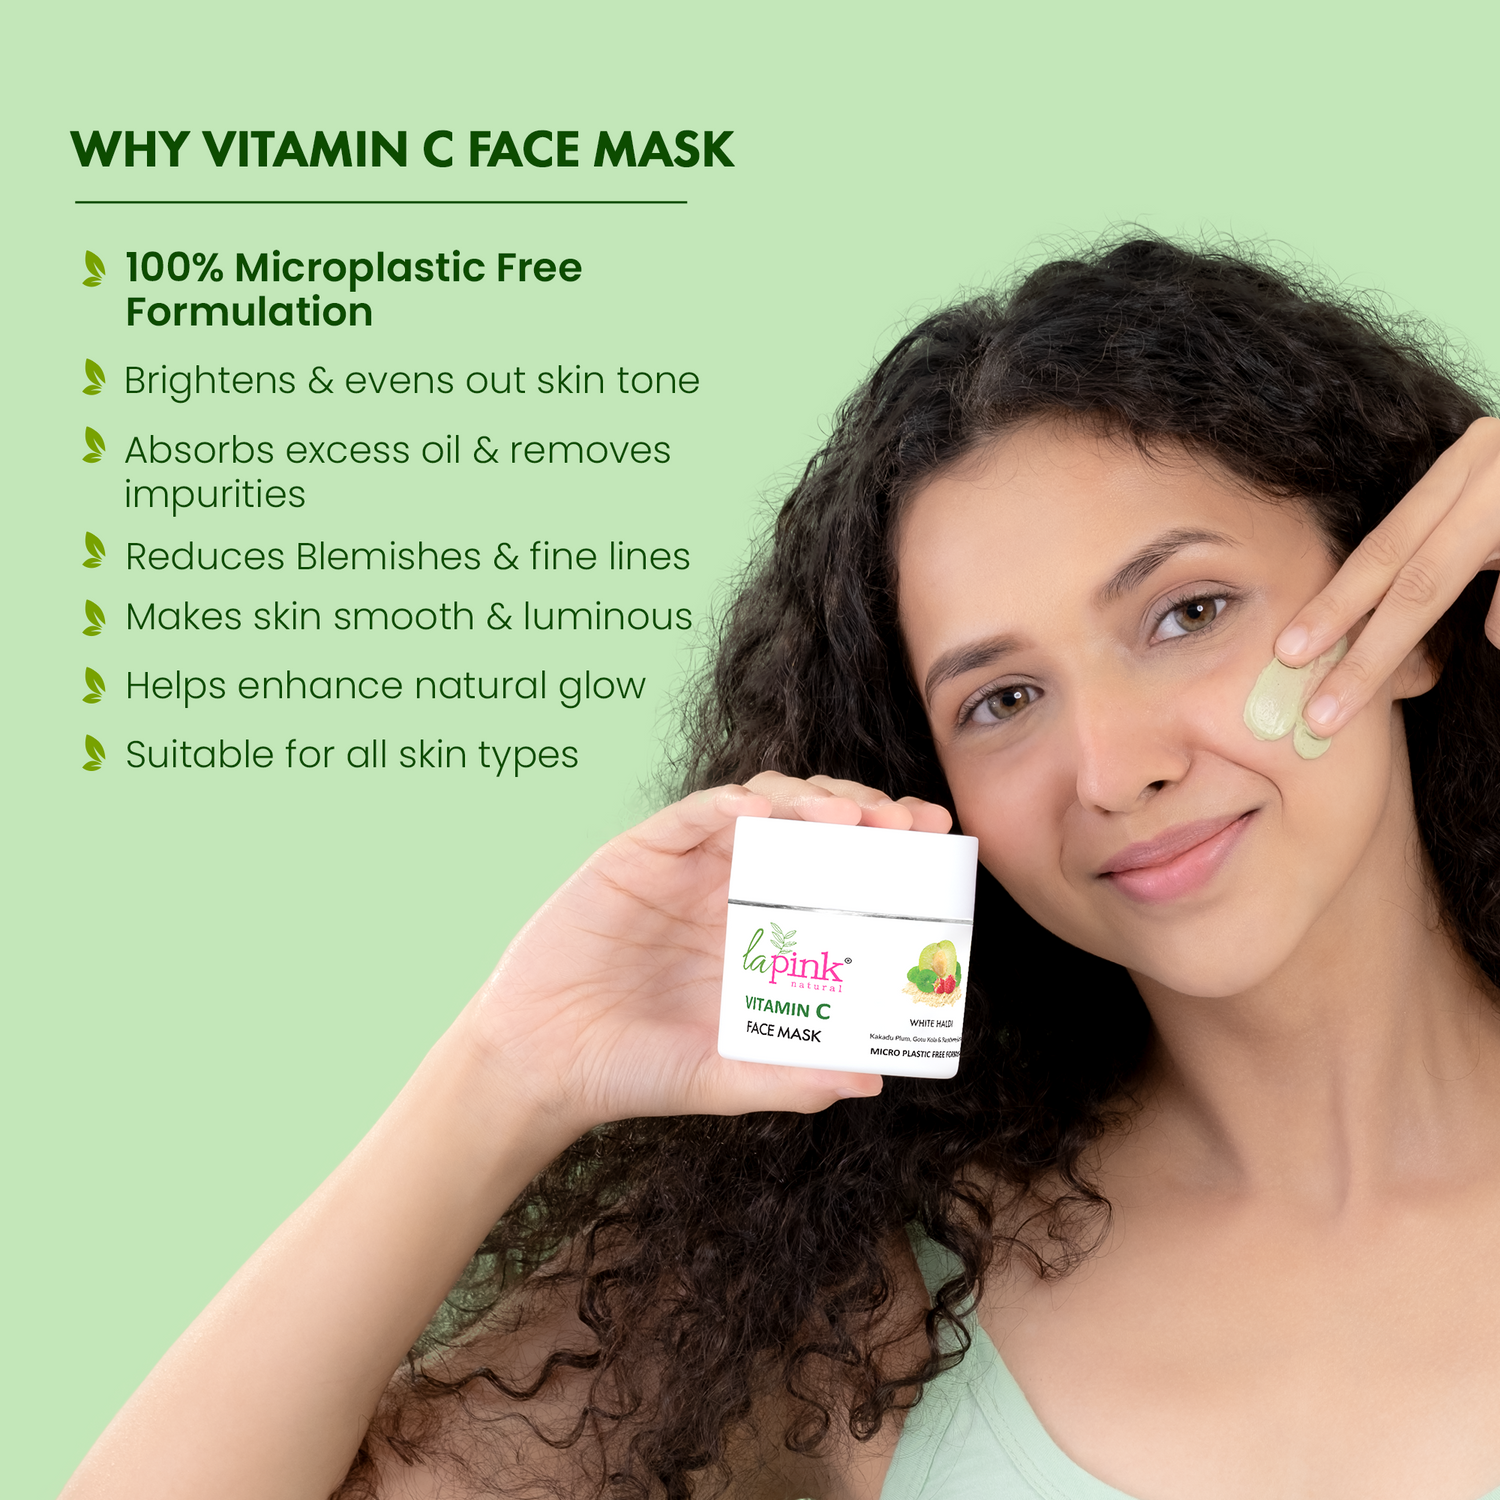 Vitamin C Face Mask with White Haldi for Glowing and Radiant Skin